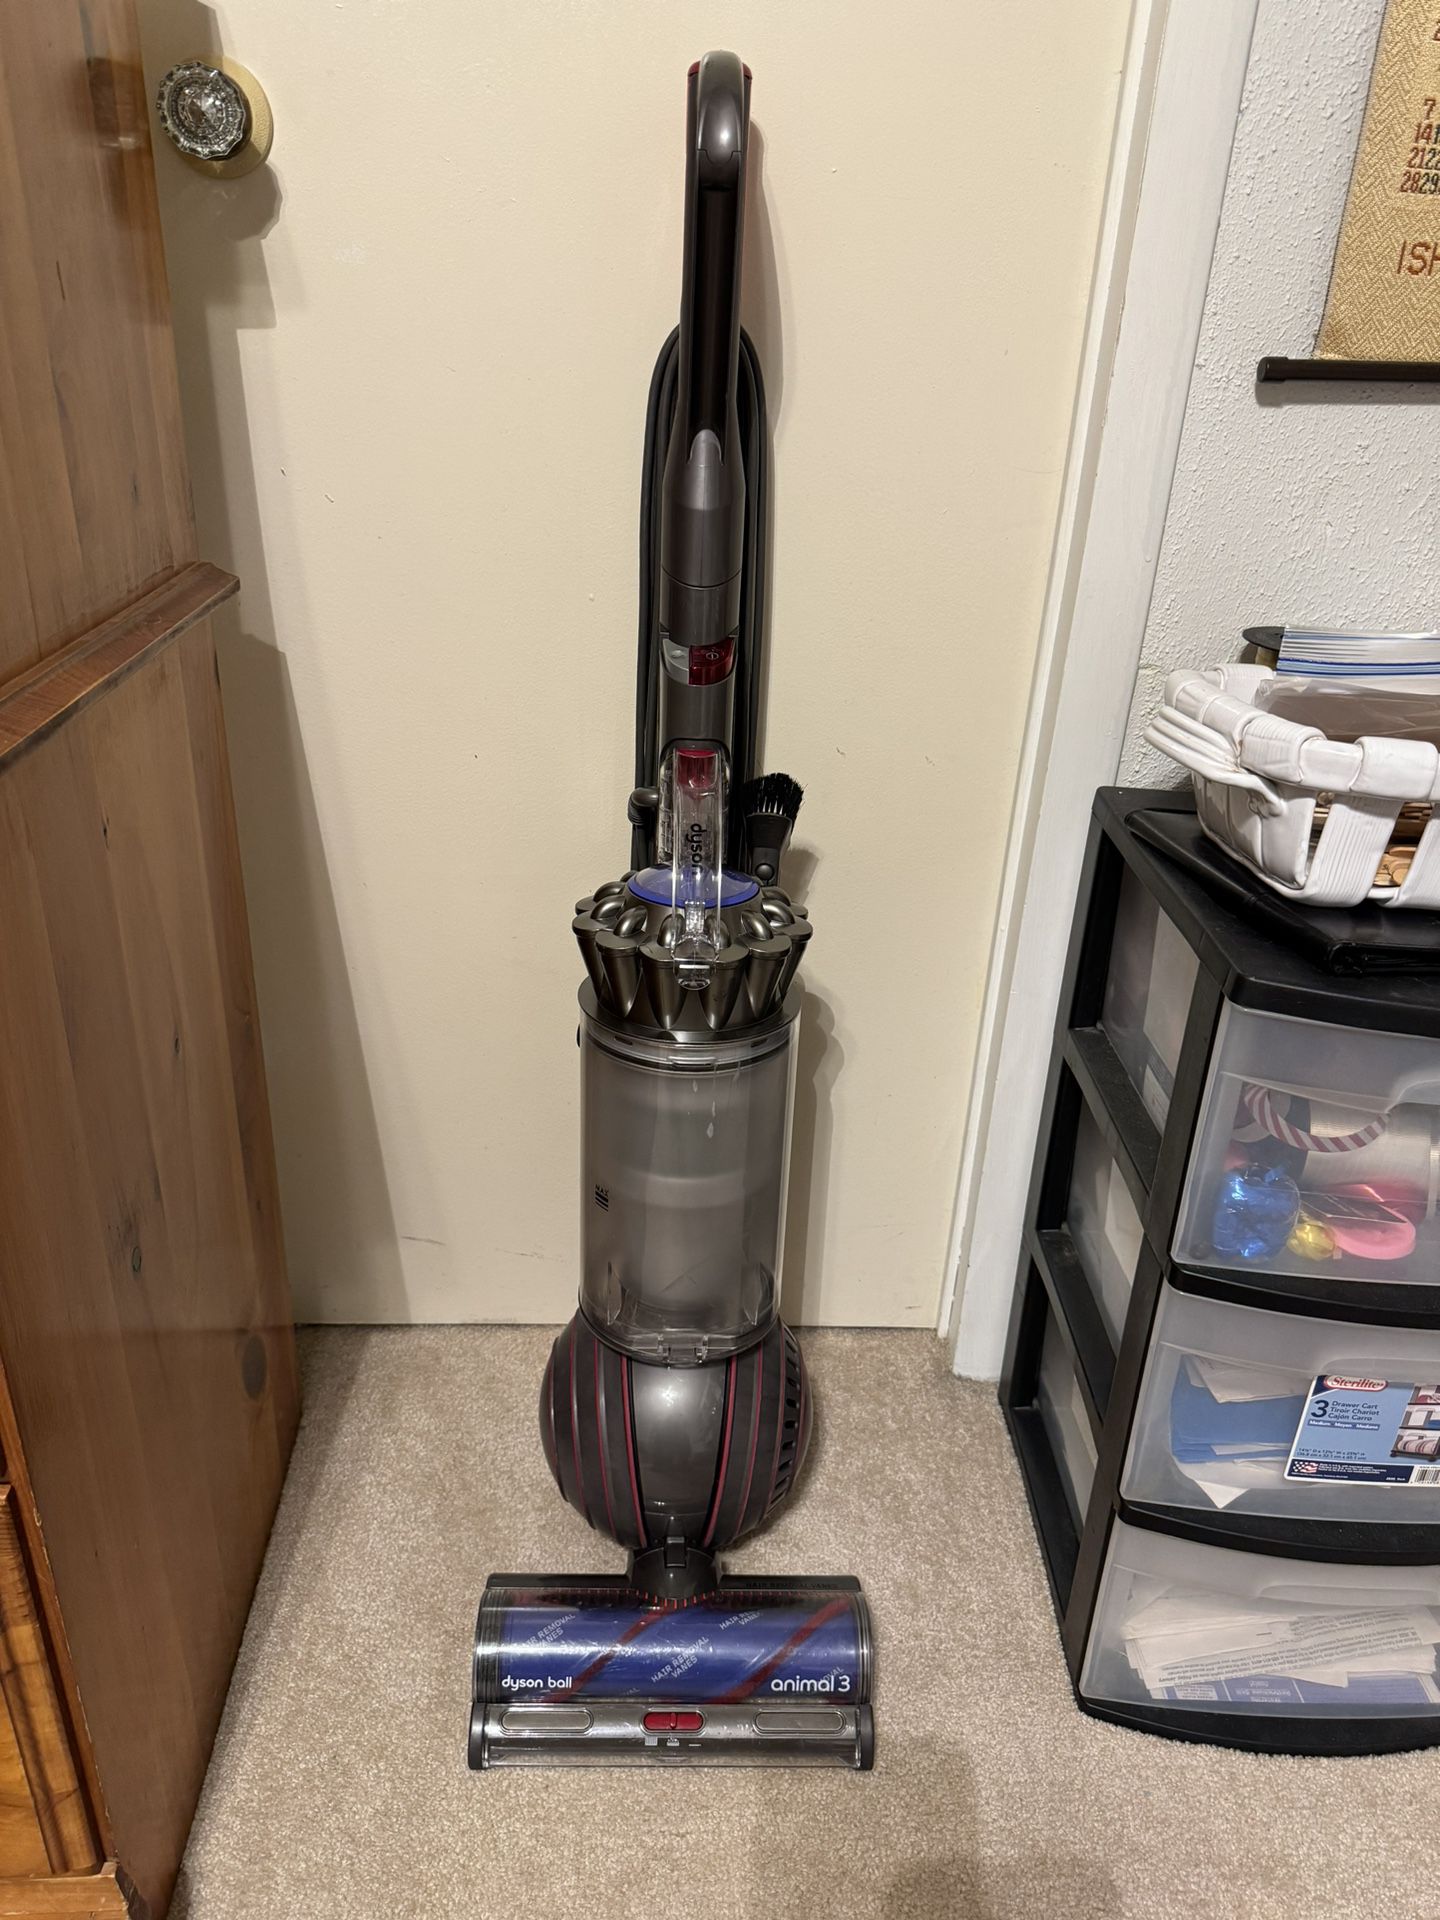 Newest Model Dyson Ball Animal 3 Vacuum Cleaner 